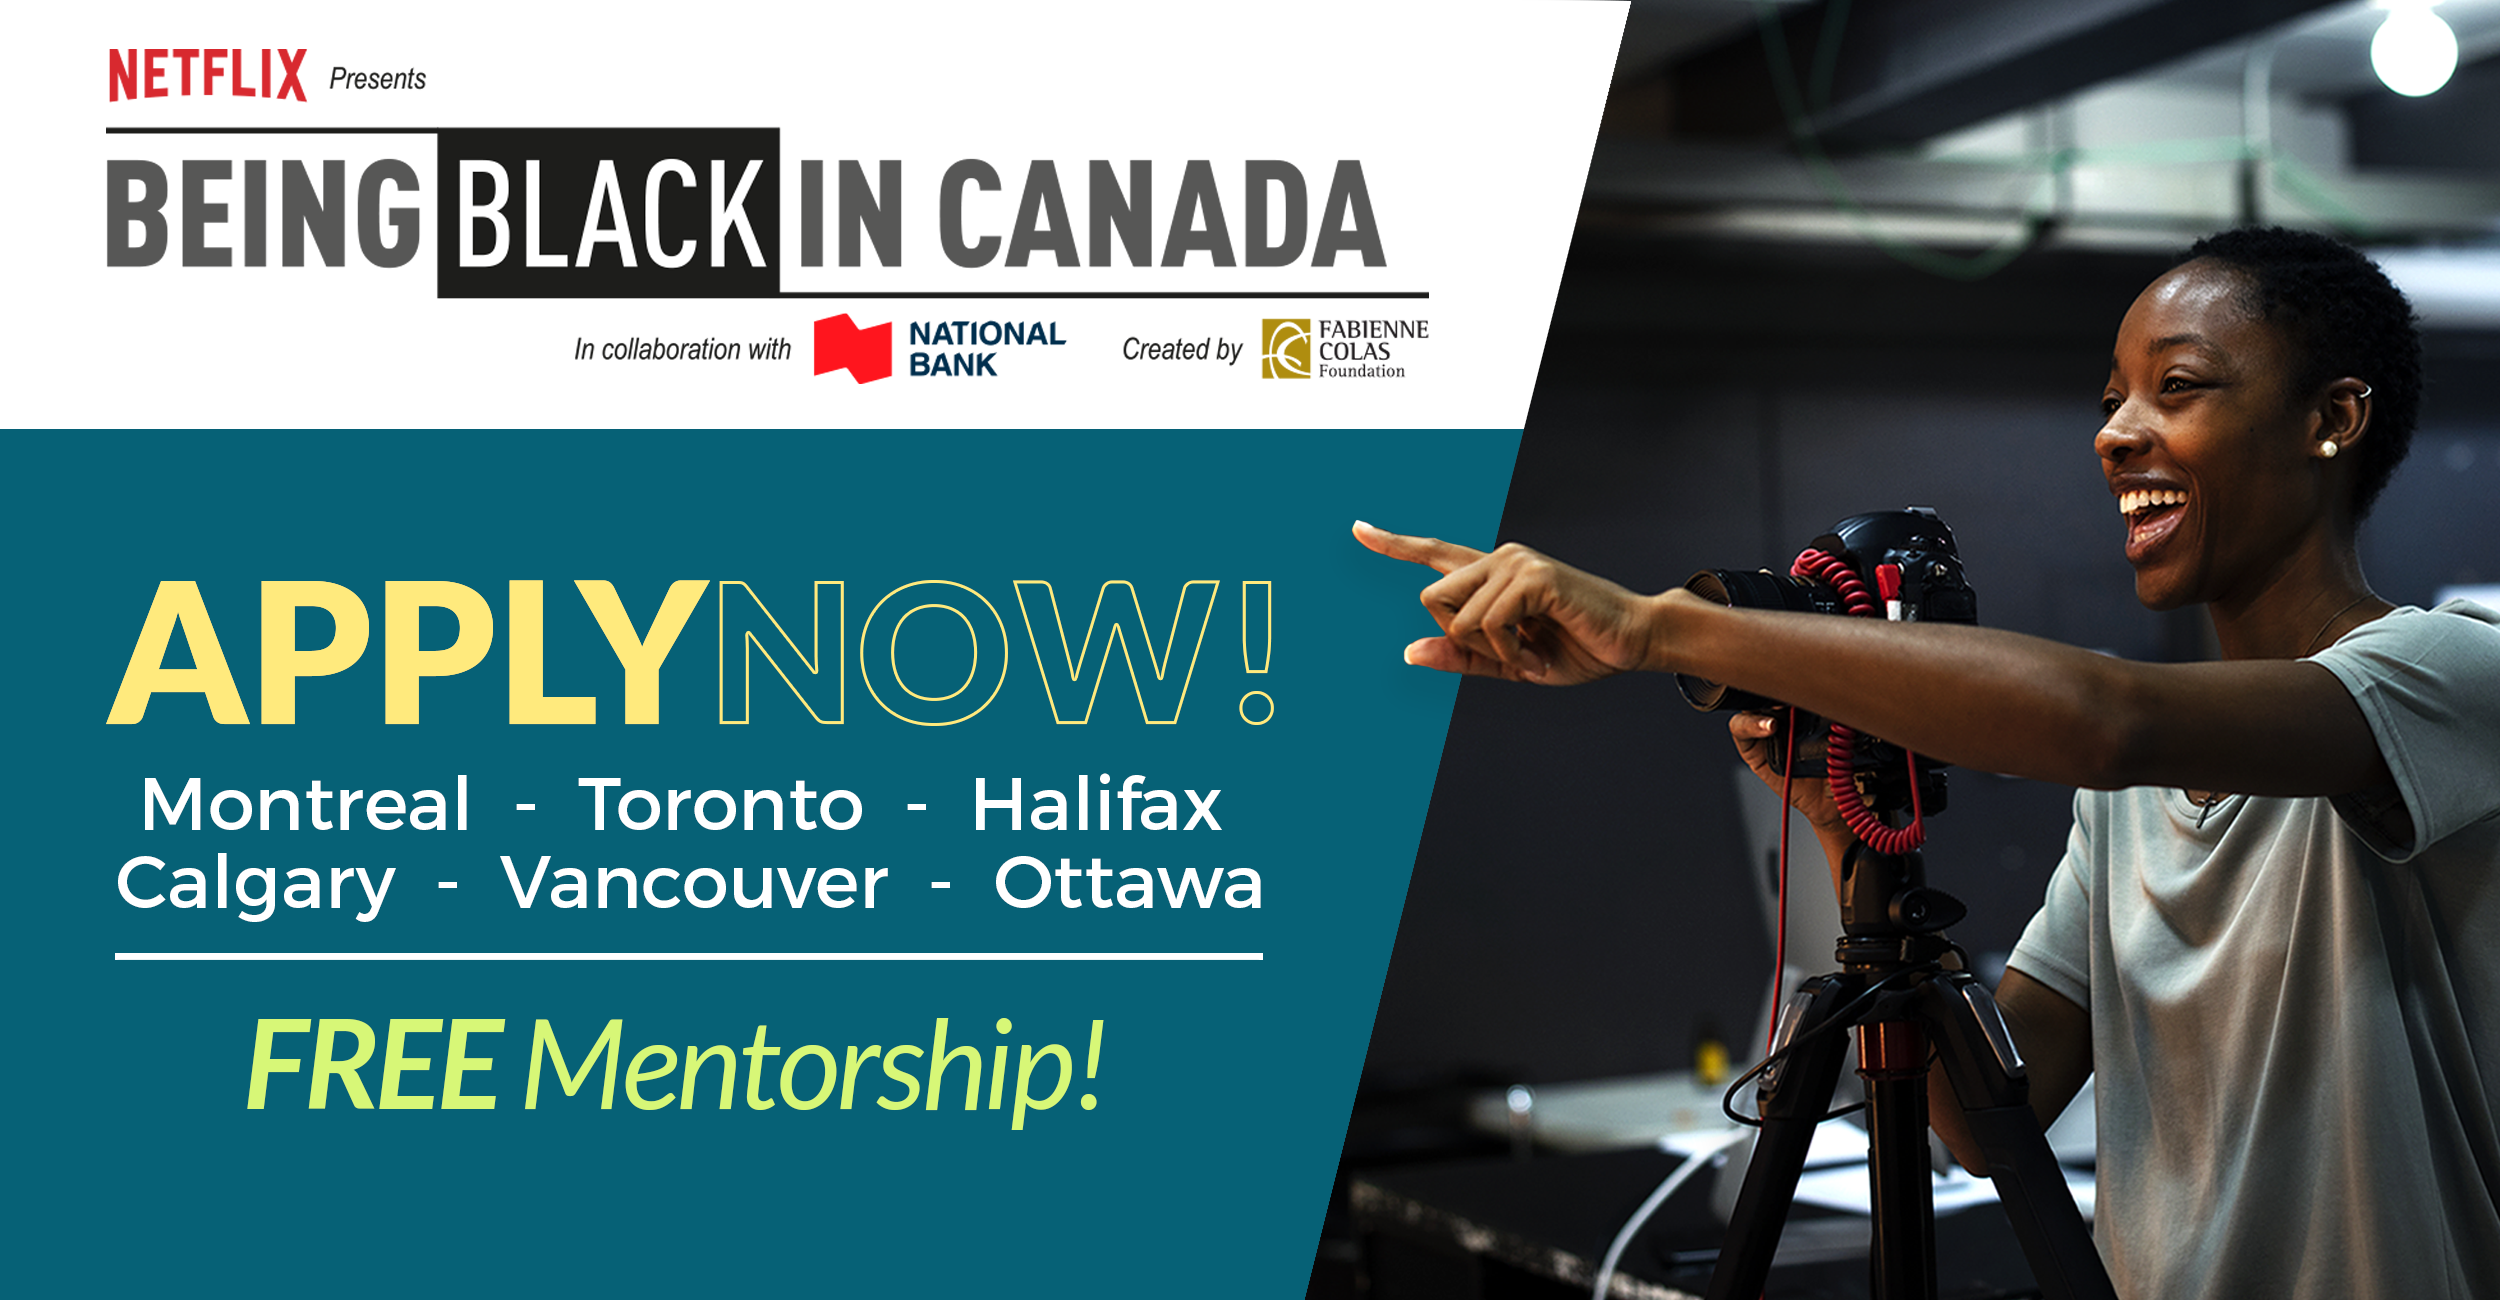 CALL FOR APPLICATIONS Fabienne Colas Foundation’s BEING BLACK IN CANADA Presented by NETFLIX in collaboration with the National Bank  Montreal, Toronto, Halifax, Ottawa, Calgary, Vancouver